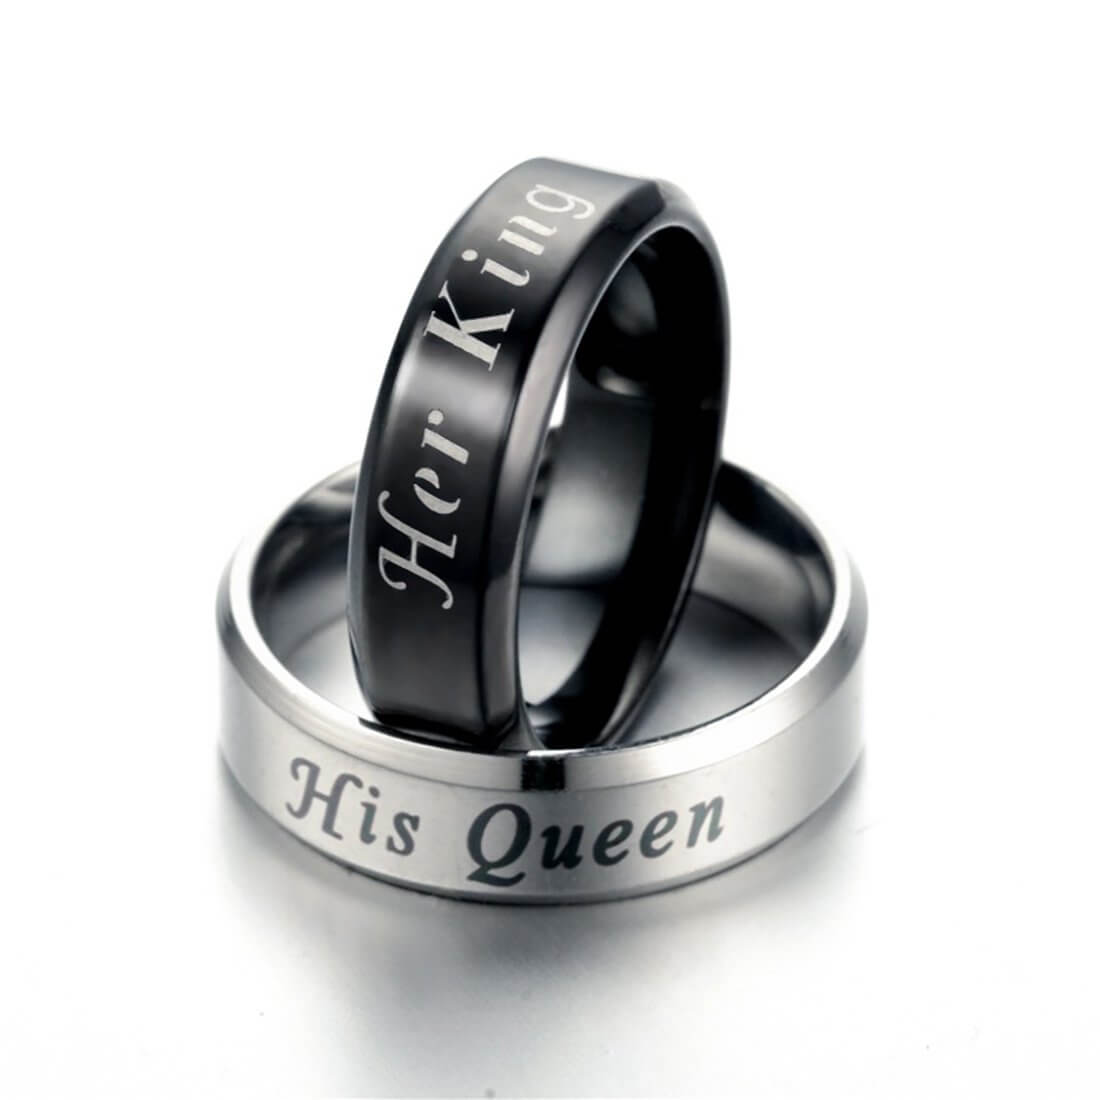 The 6MM His Queen Female Ring | King & Queen Rings